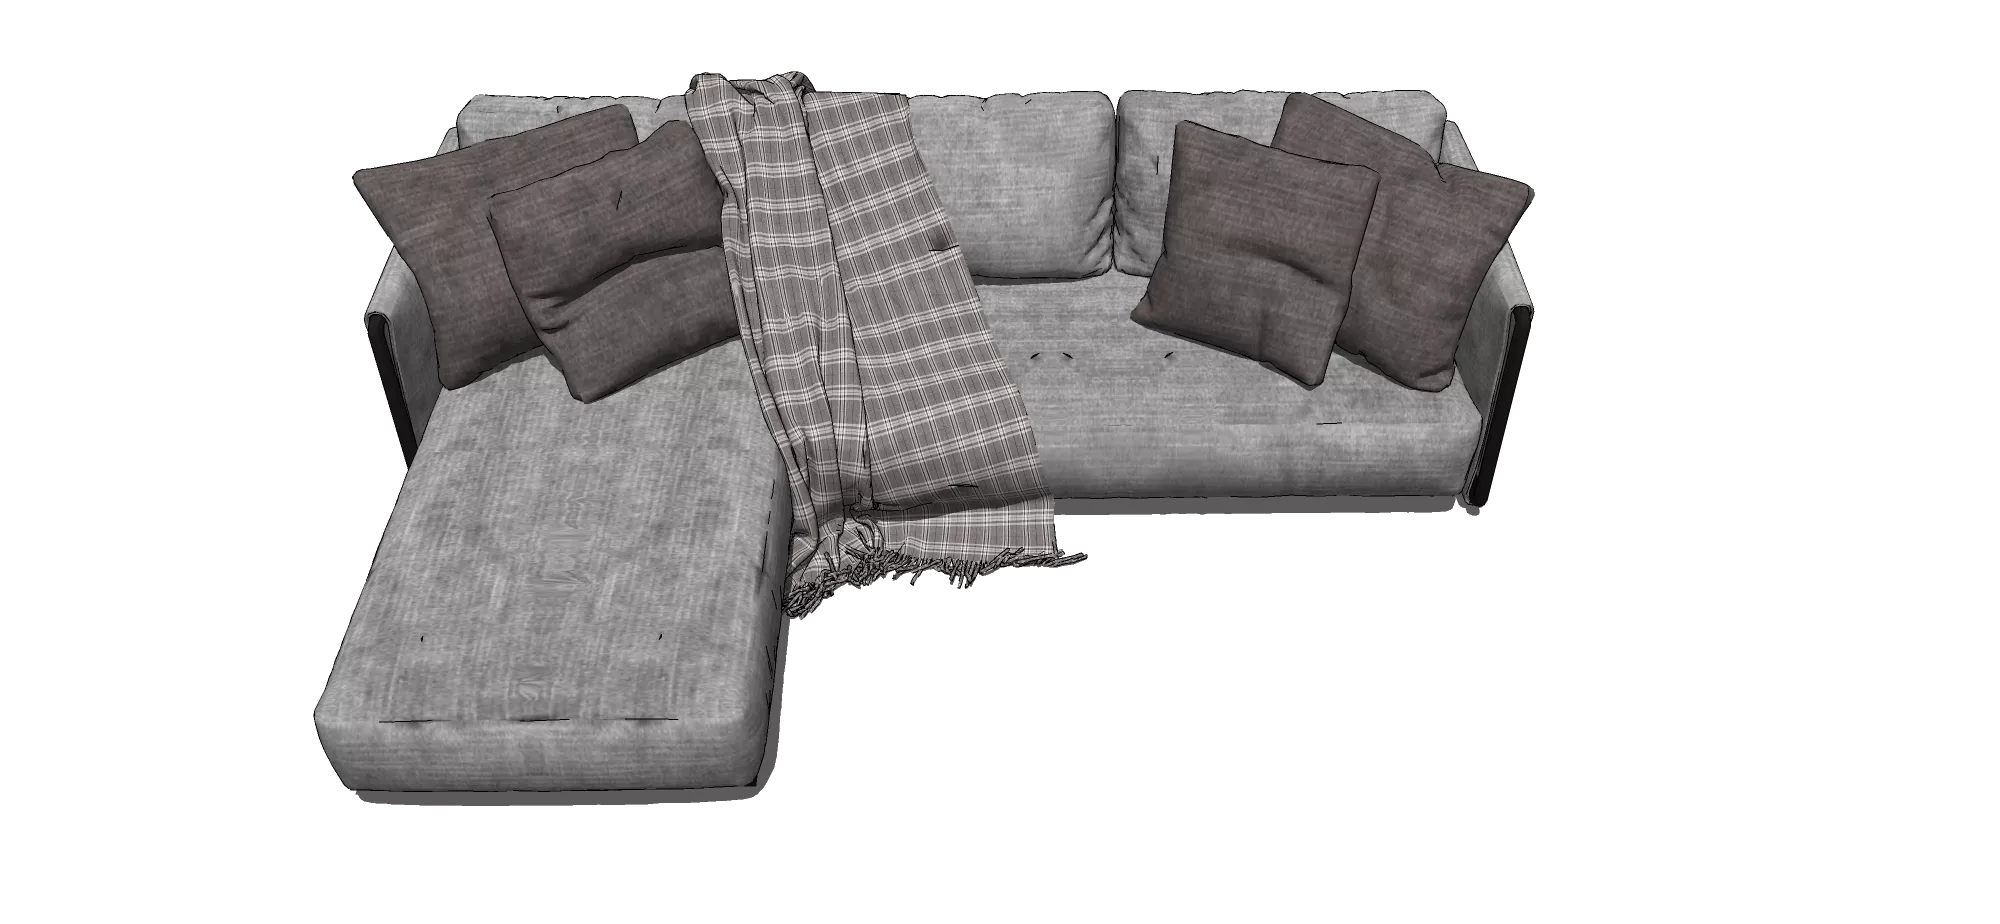 MODERN SOFA - SKETCHUP 3D MODEL - VRAY OR ENSCAPE - ID13078